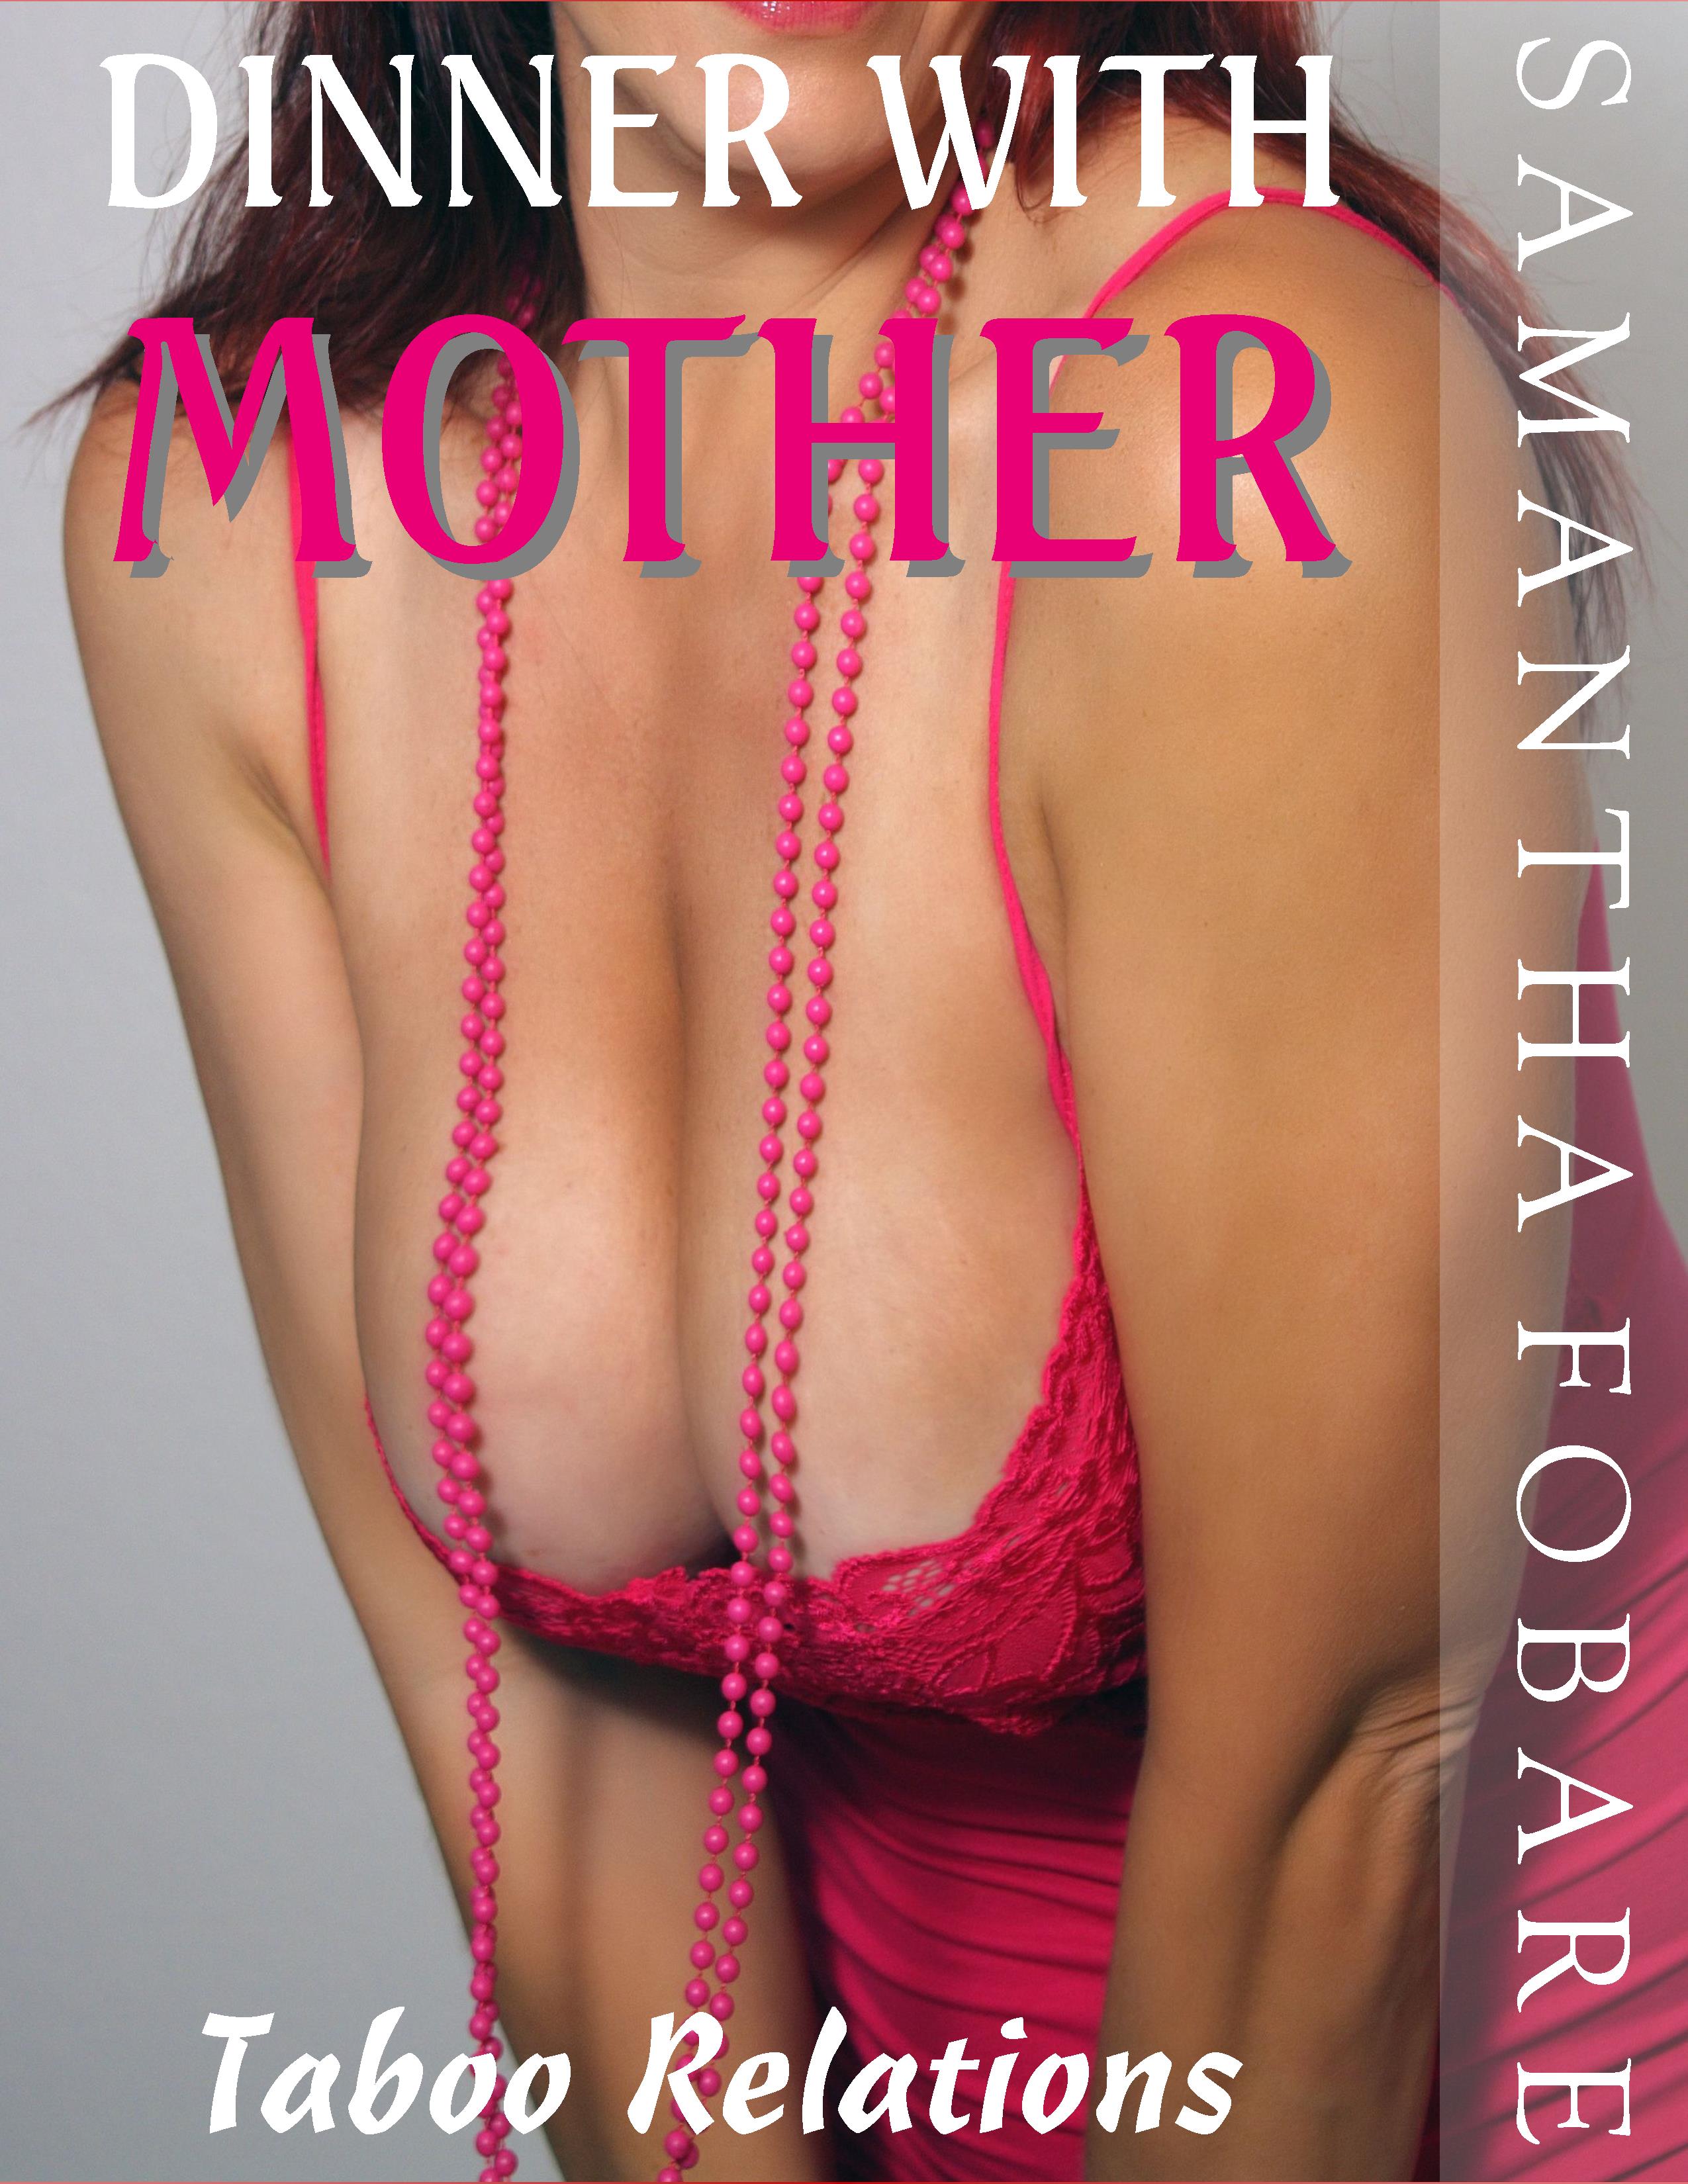 Mother Son Taboo Sex - Dinner with Mother: Taboo Relations, an Ebook by Samantha Fobare